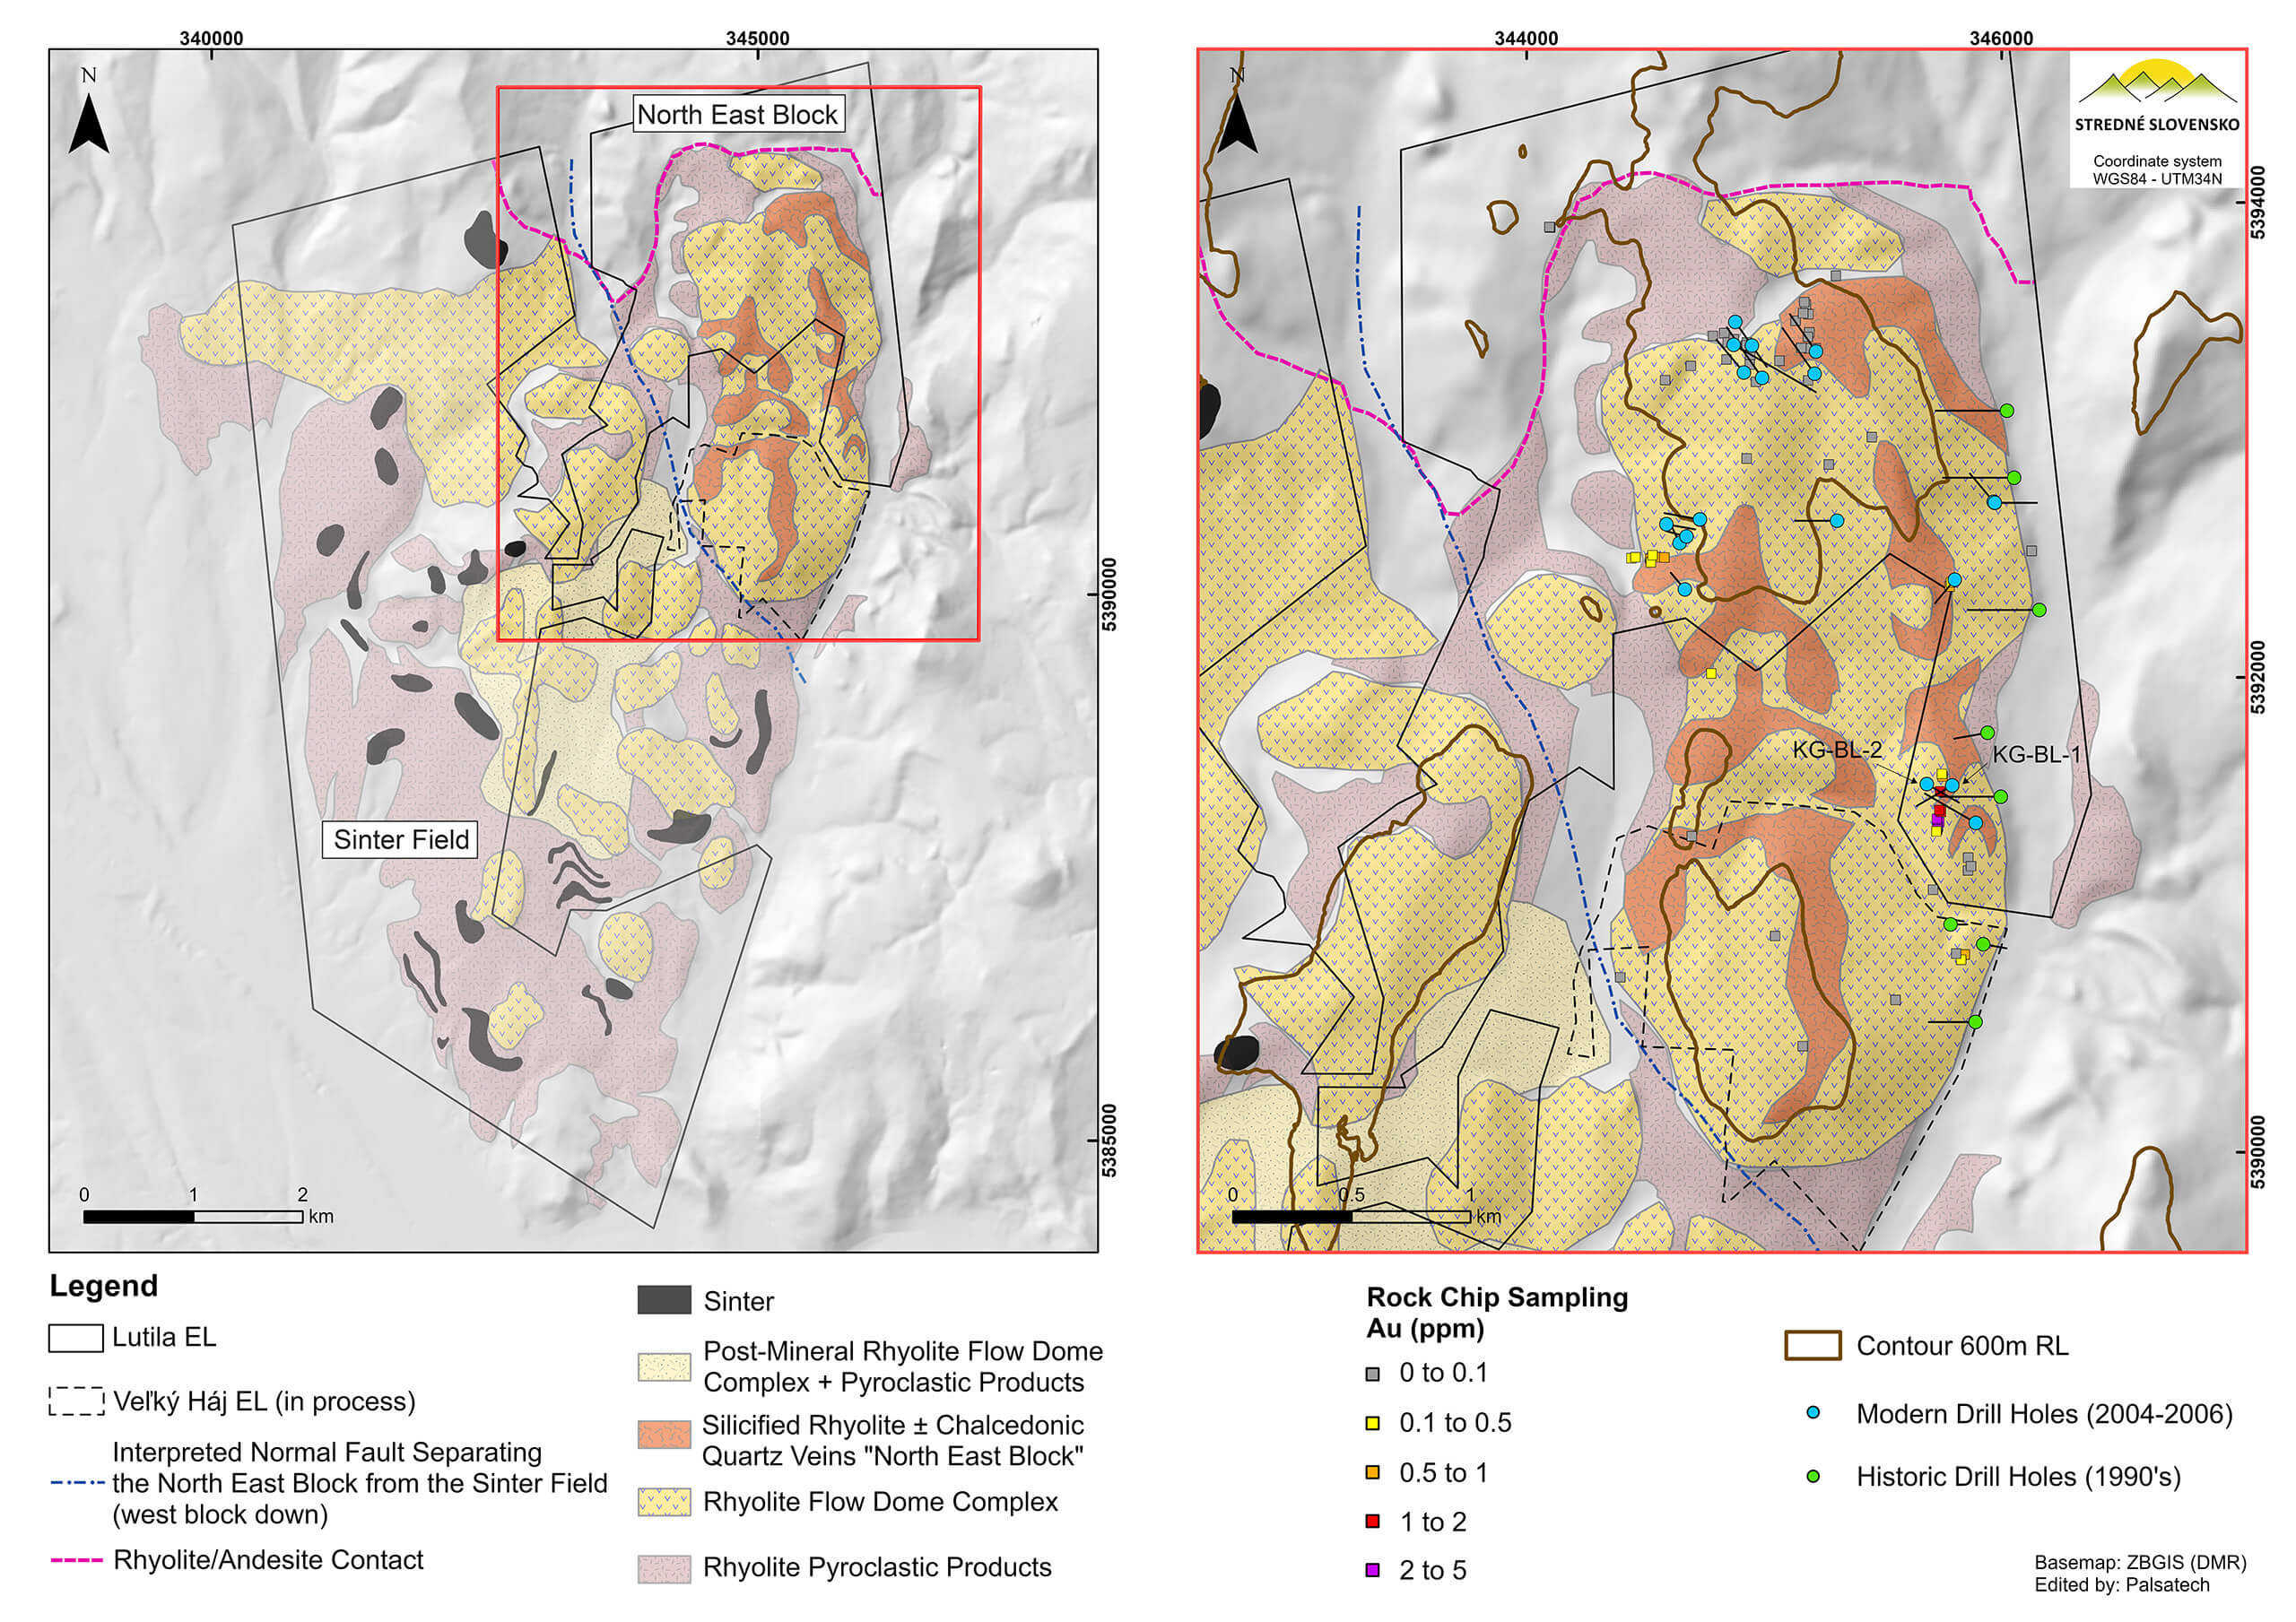 lutila north east block geology historic rock drilling - BULGOLD Inc. Highlights The Potential Scale Of The Lutila Gold Project Through A Review of Historic Exploration Data